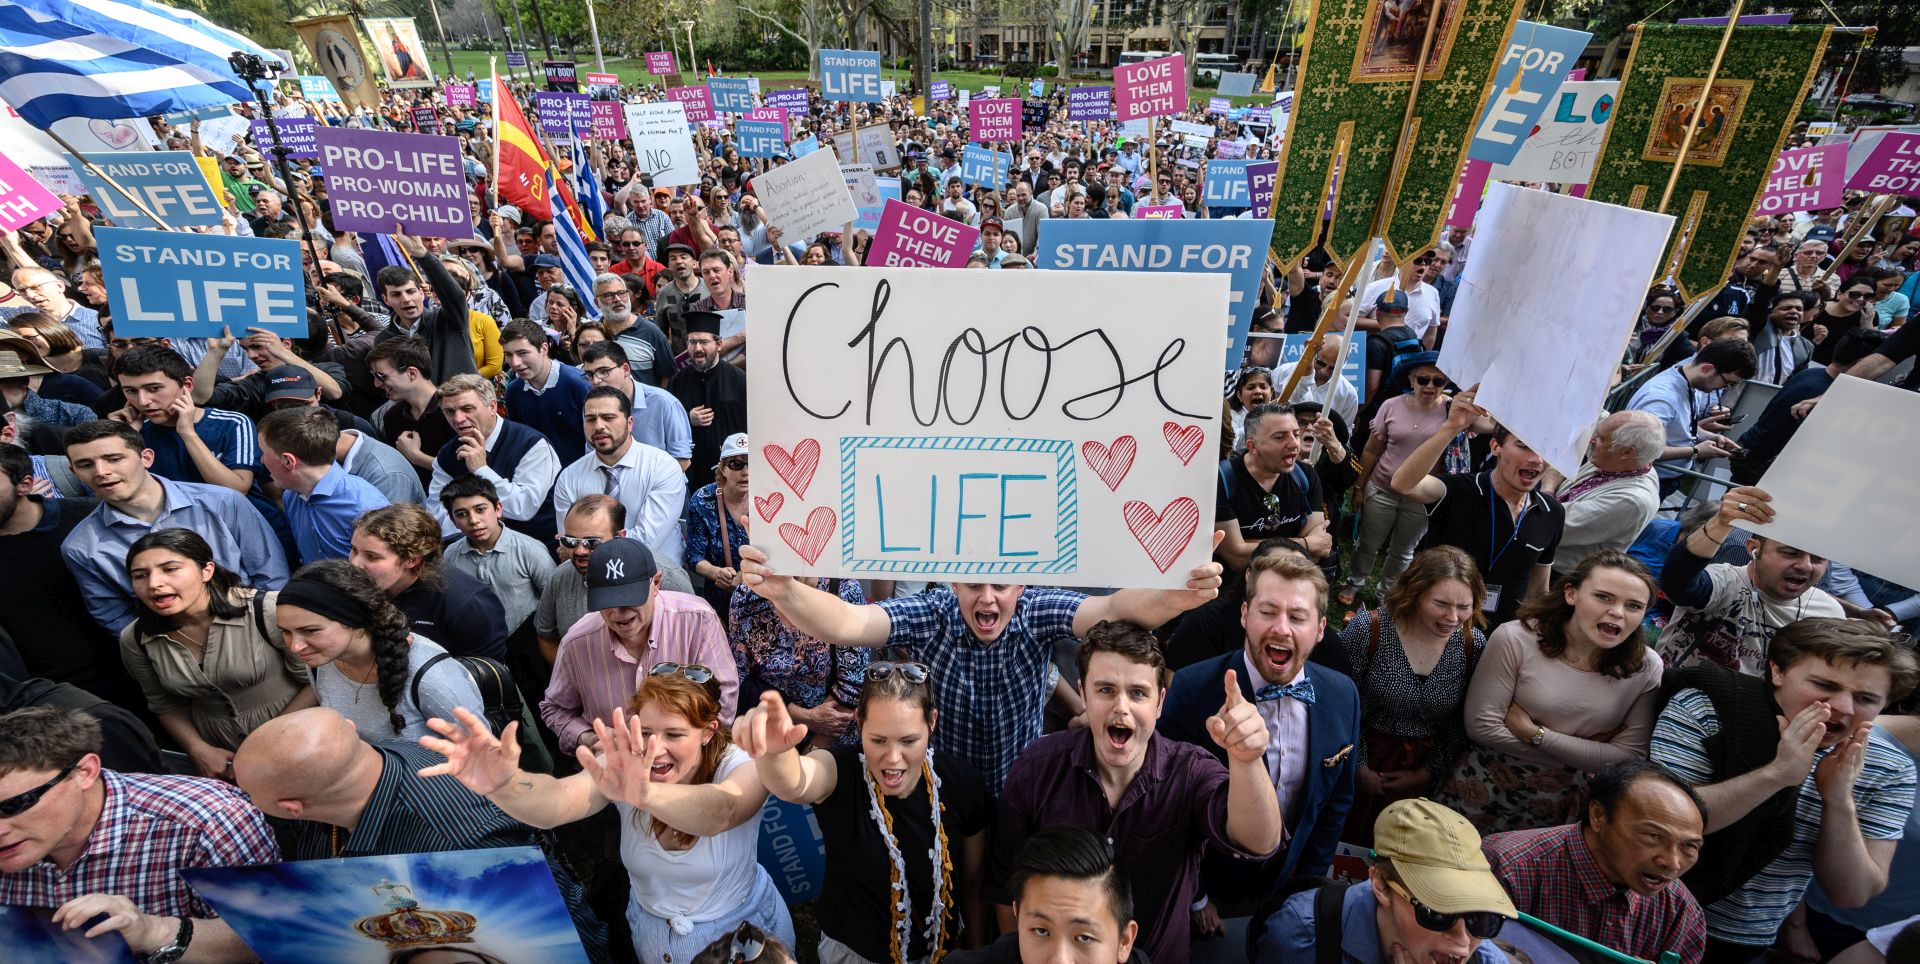 epa07844258 Protesters hold a pro-life banner during an anti-abortion rally in Hyde Park in Sydney, New South Wales, Australia, 15 September 2019. Members of Parliament (MPs) joined pro-life and pro-family groups, women's advocates, faith leaders and thousands of people from across the state to rally against the Reproductive Health Care Reform Bill 2019.  EPA/JAMES GOURLEY  AUSTRALIA AND NEW ZEALAND OUT